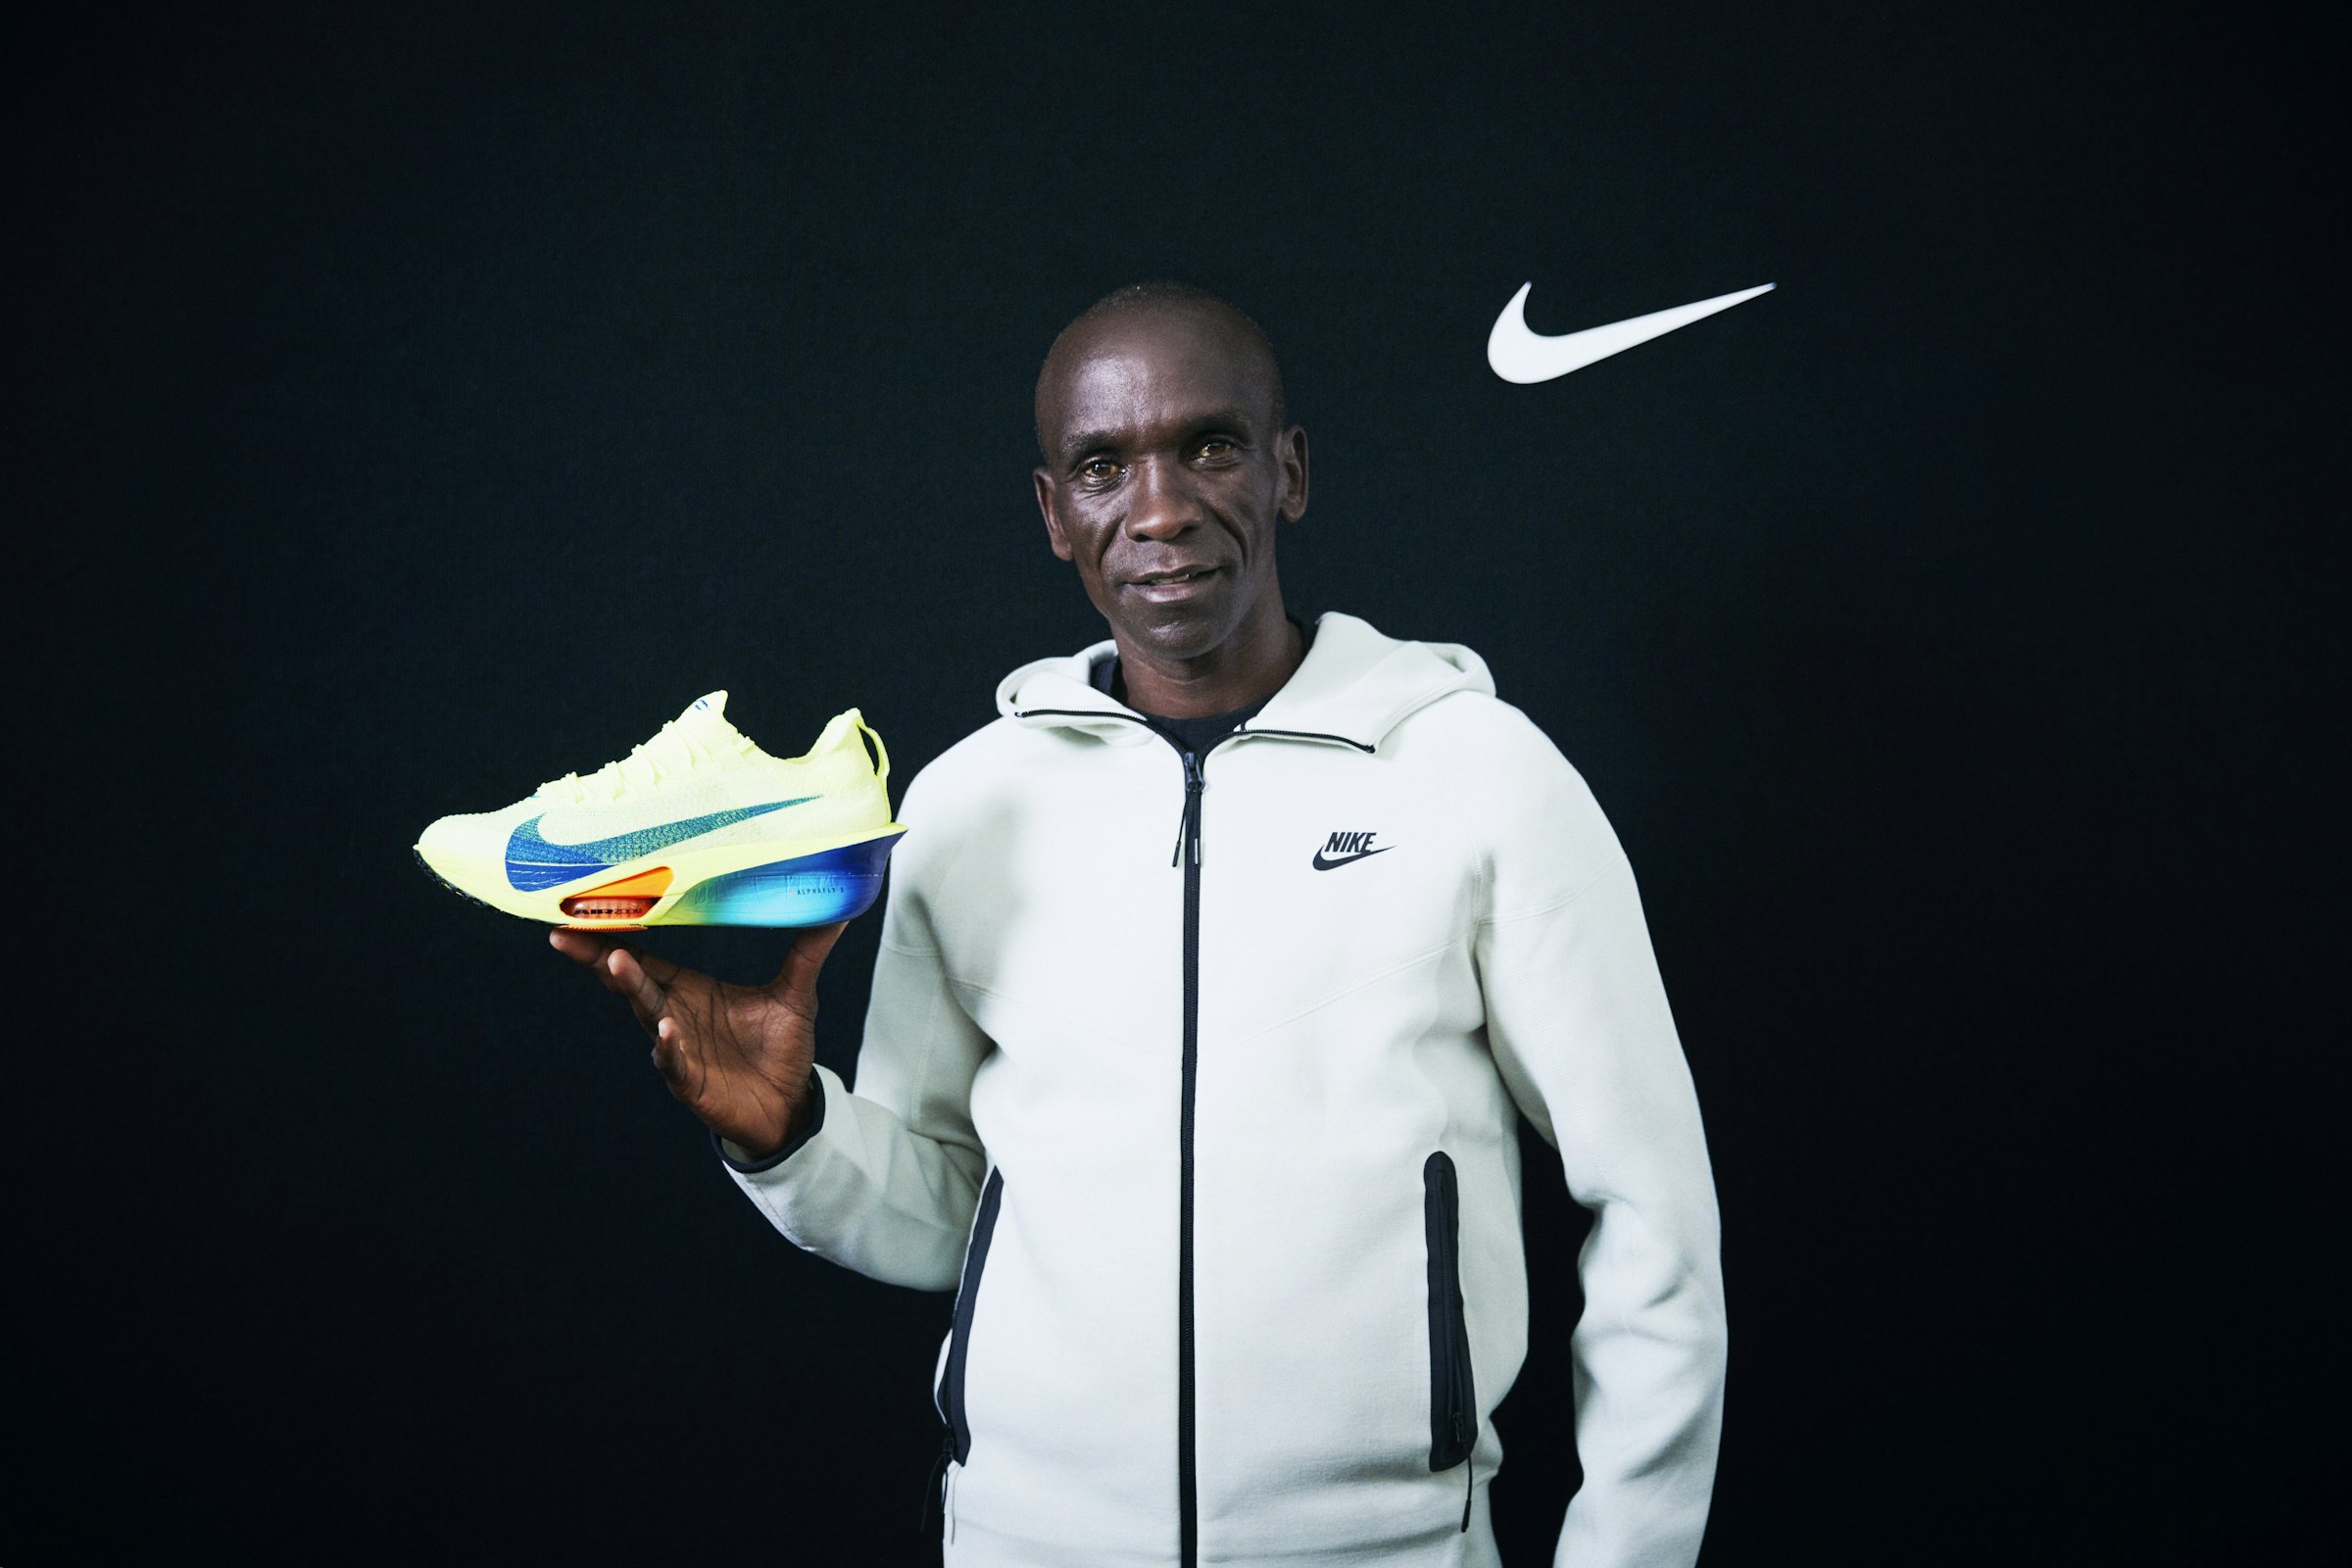 Kipchoge, who likes the new colorings of the 'AlphaFly 3'